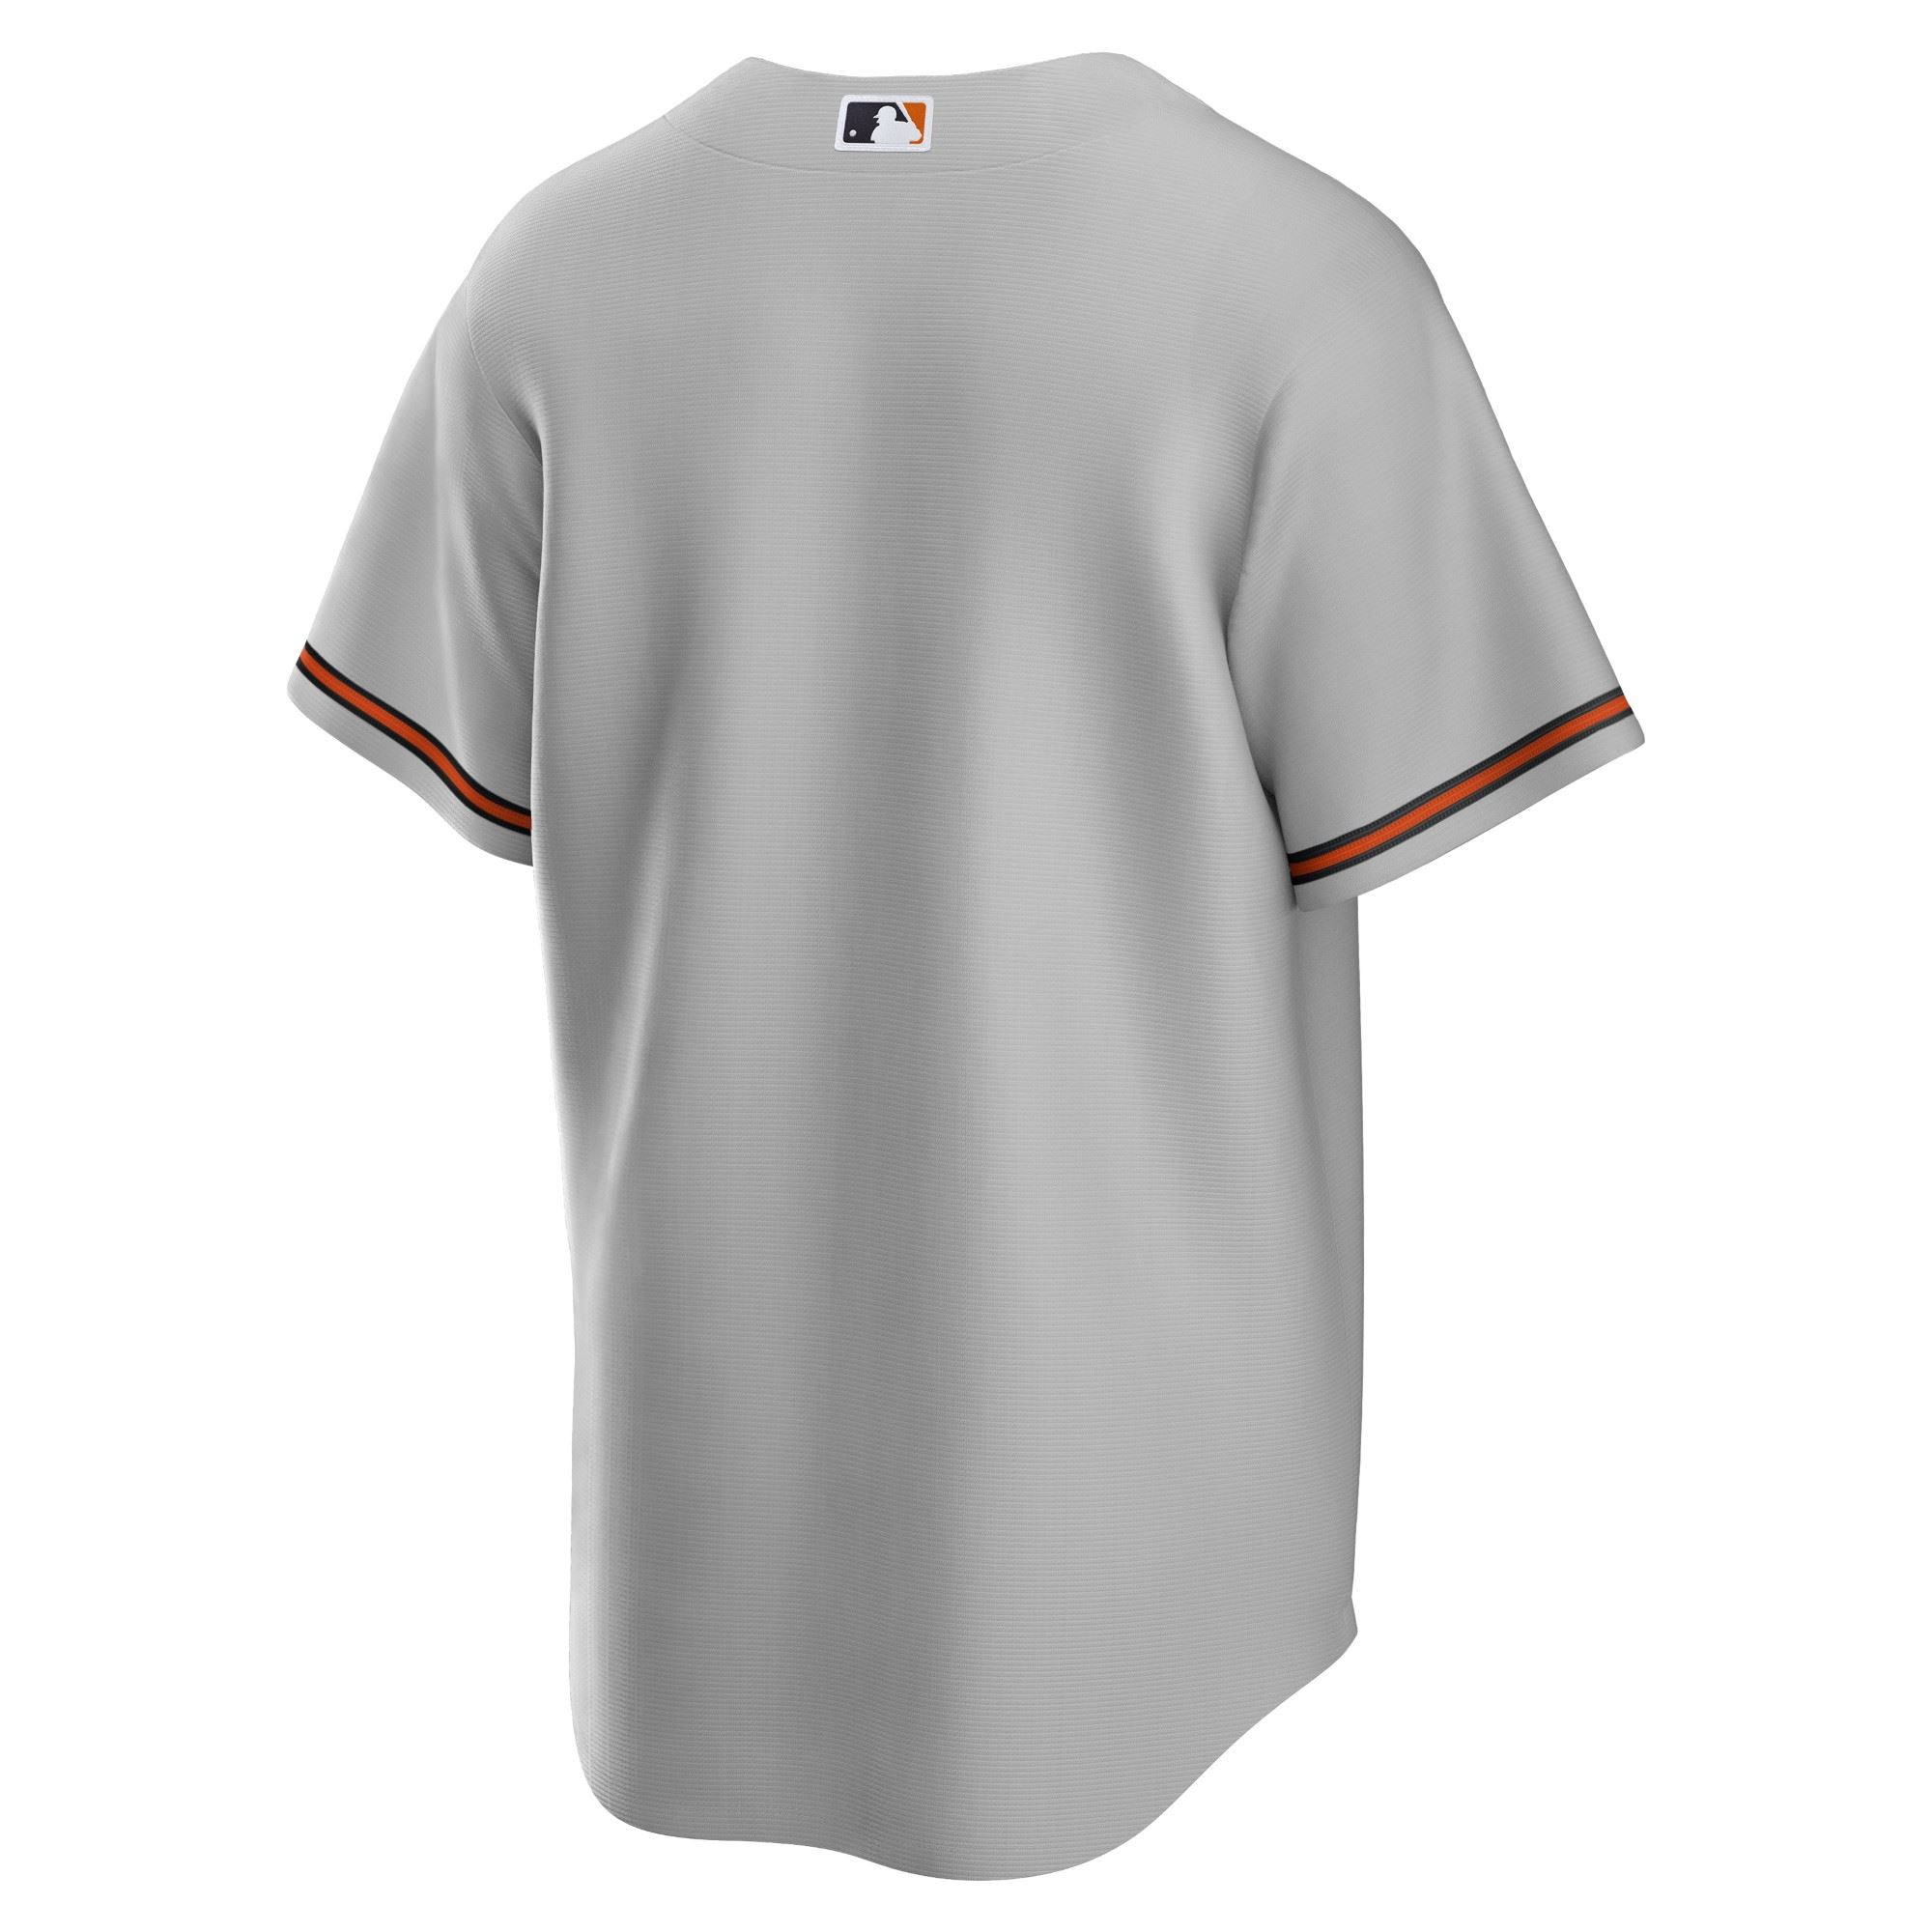 Baltimore Orioles Gray Official MLB Replica Road Jersey Nike